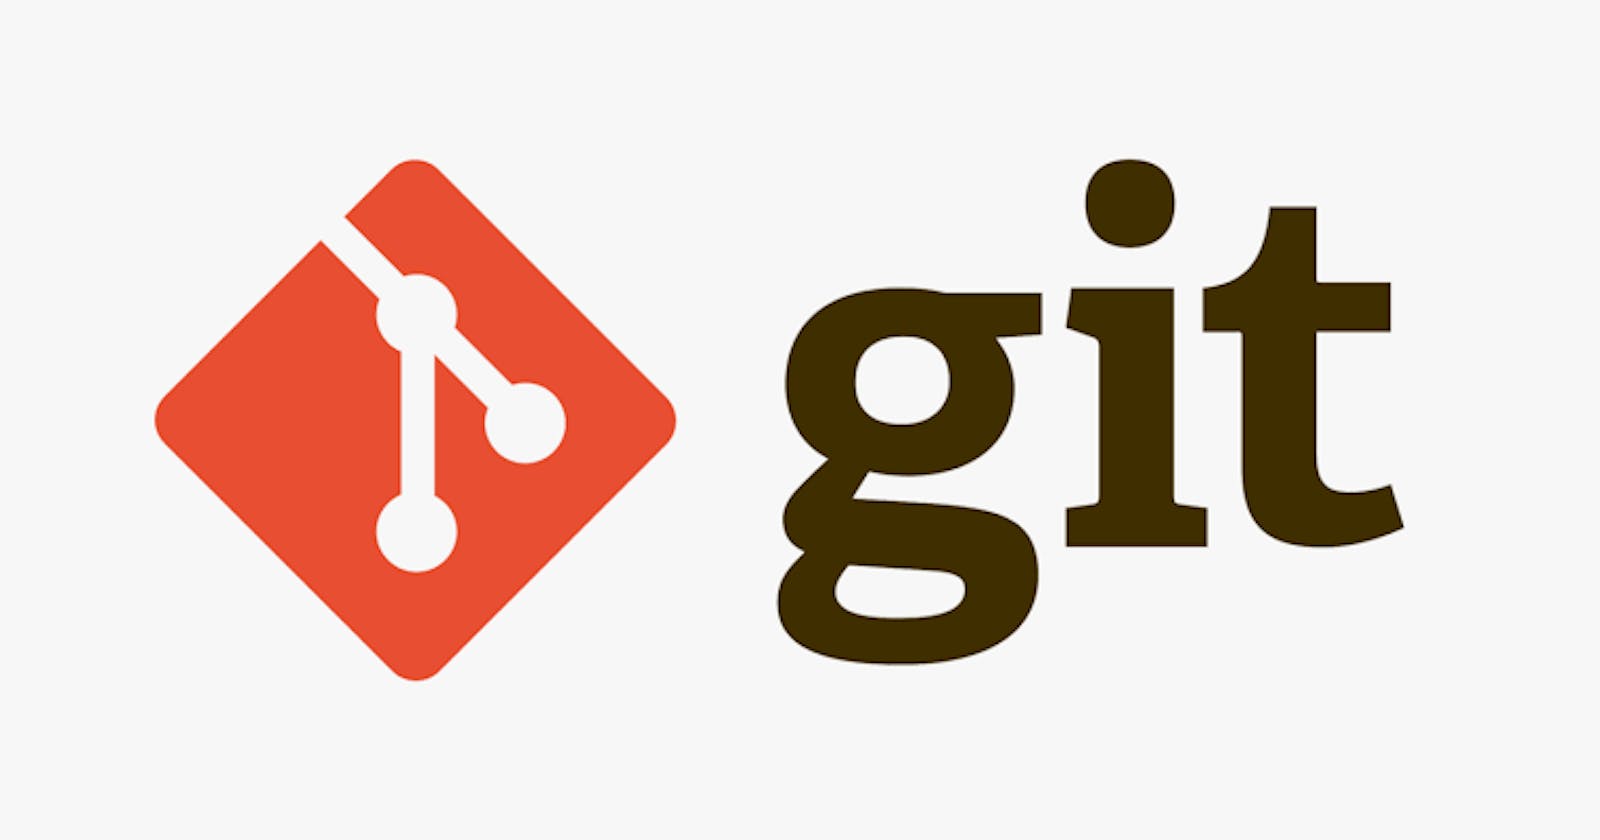 Git uses and advantages